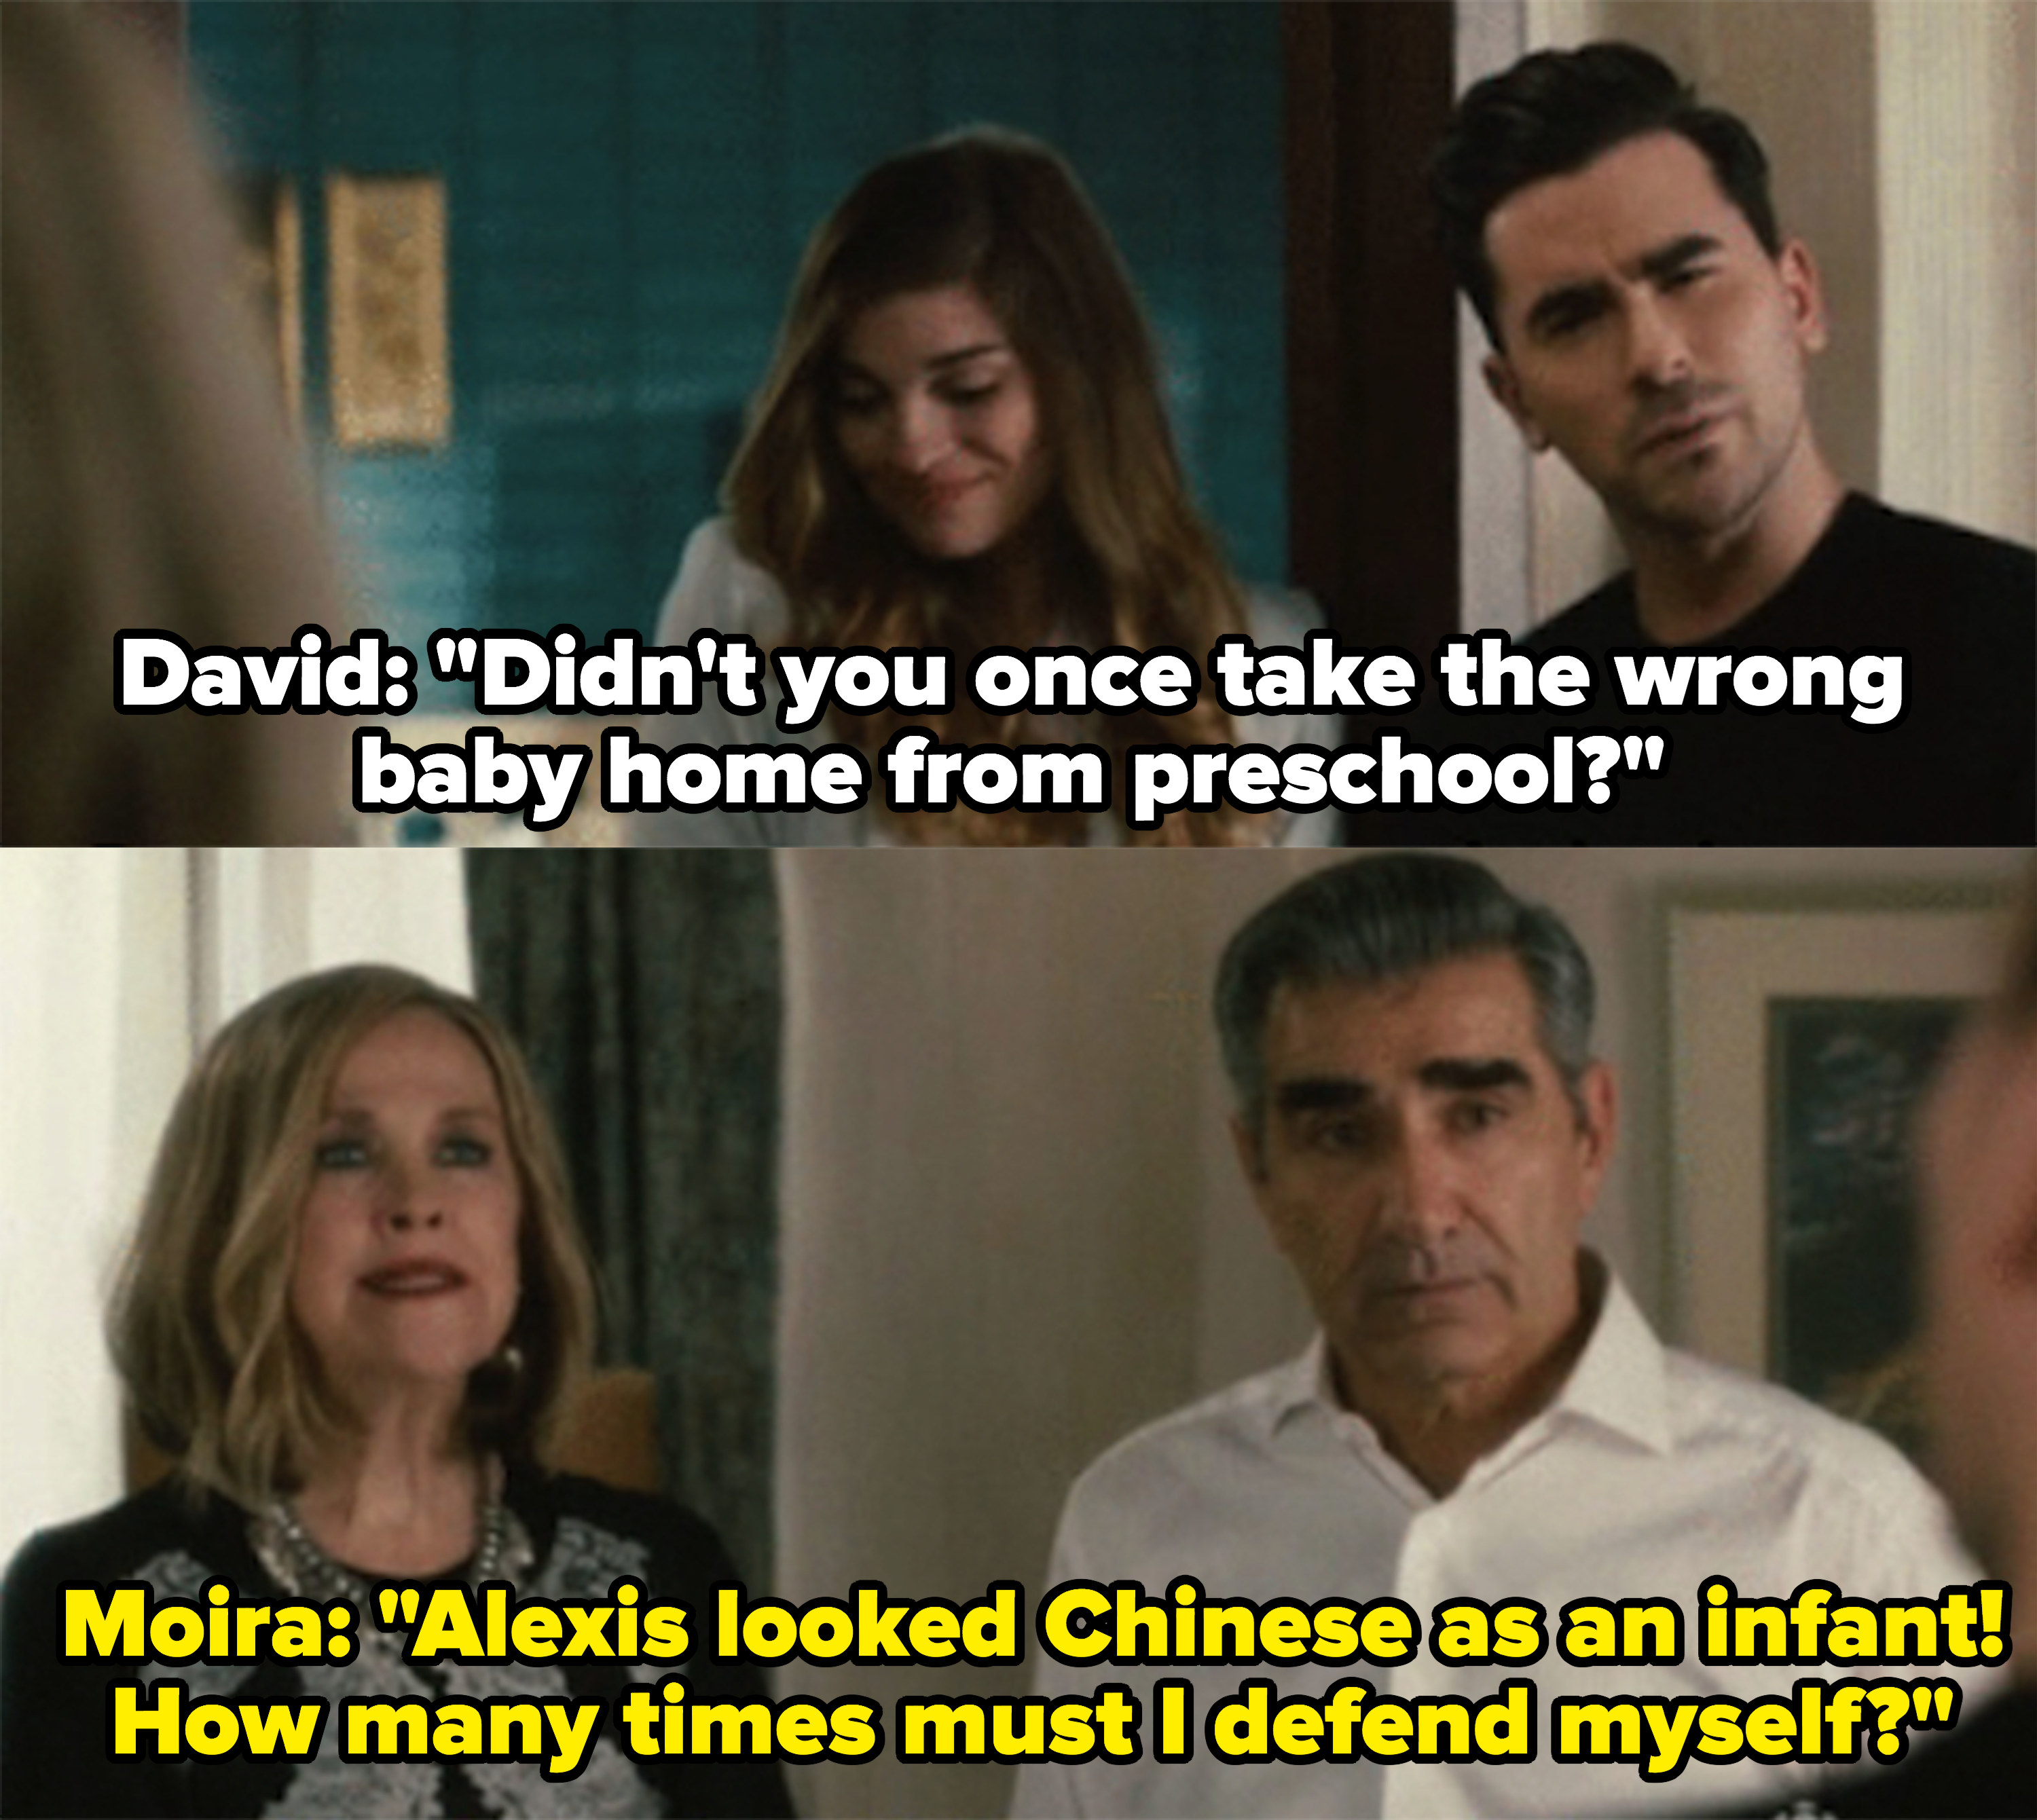 David says Moira once took the wrong baby home from preschool and Moira claims Alexis &quot;looked Chinese as an infant&quot;